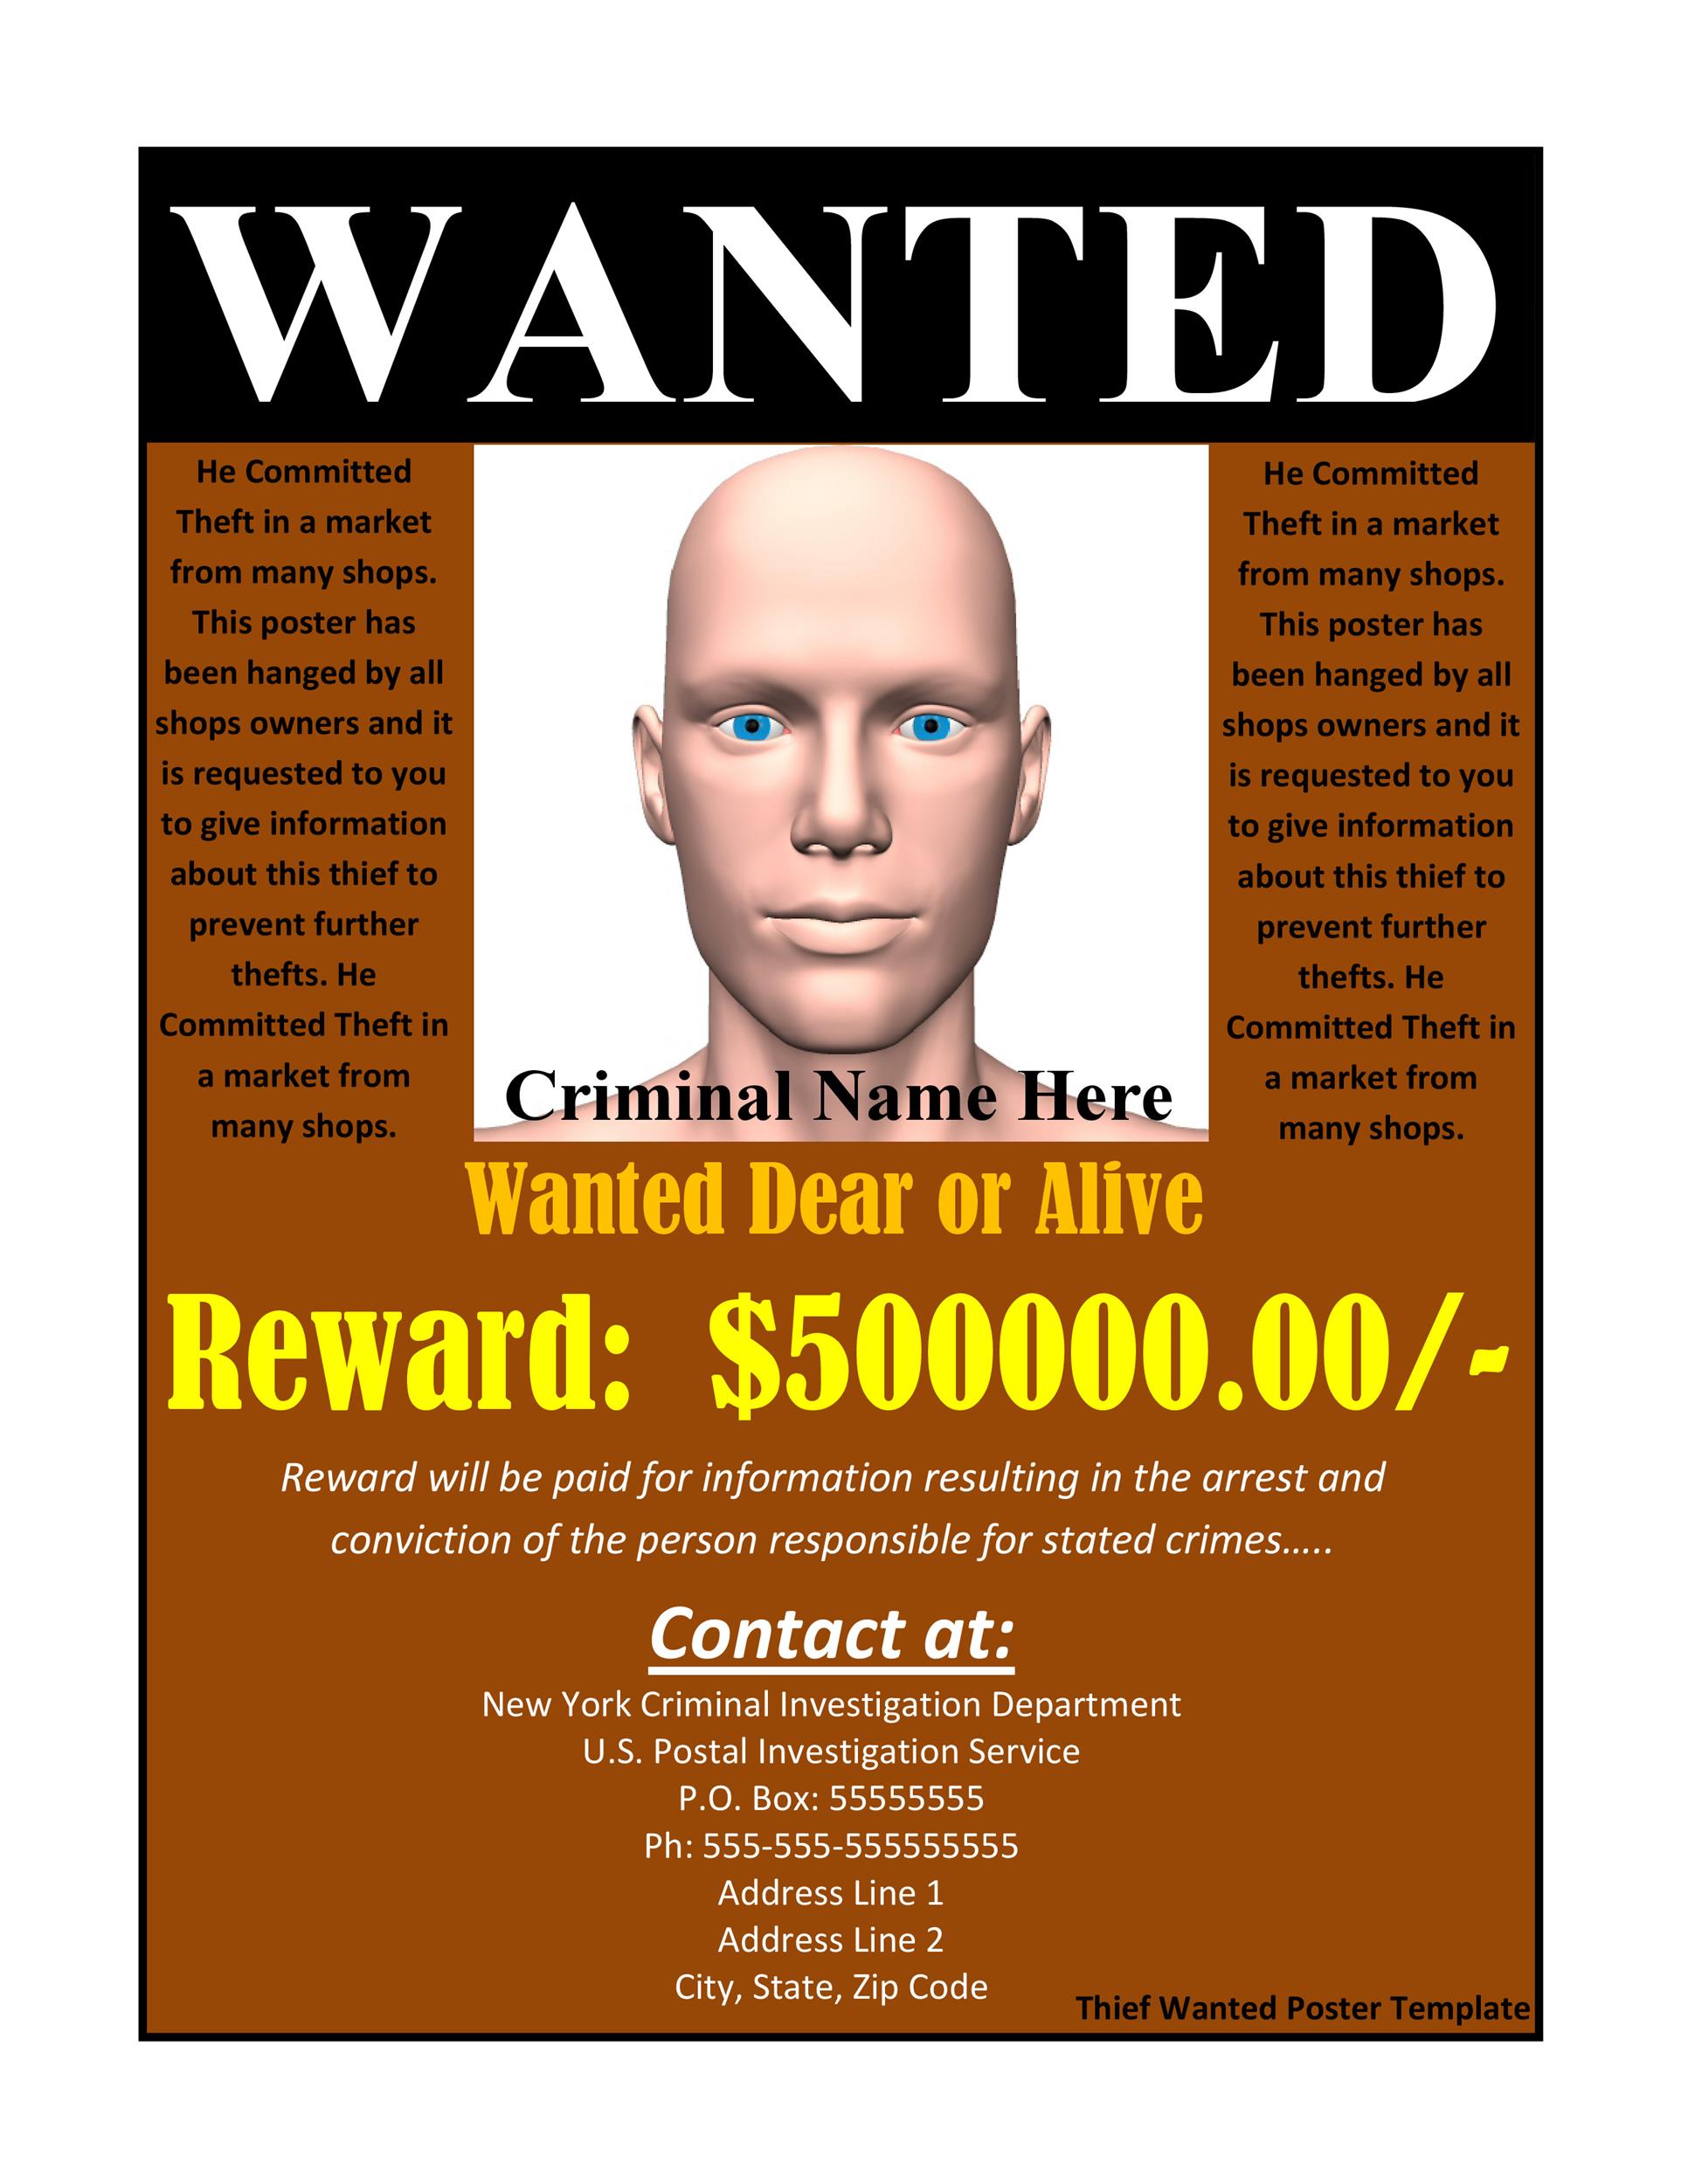 Wanted Police Poster Template